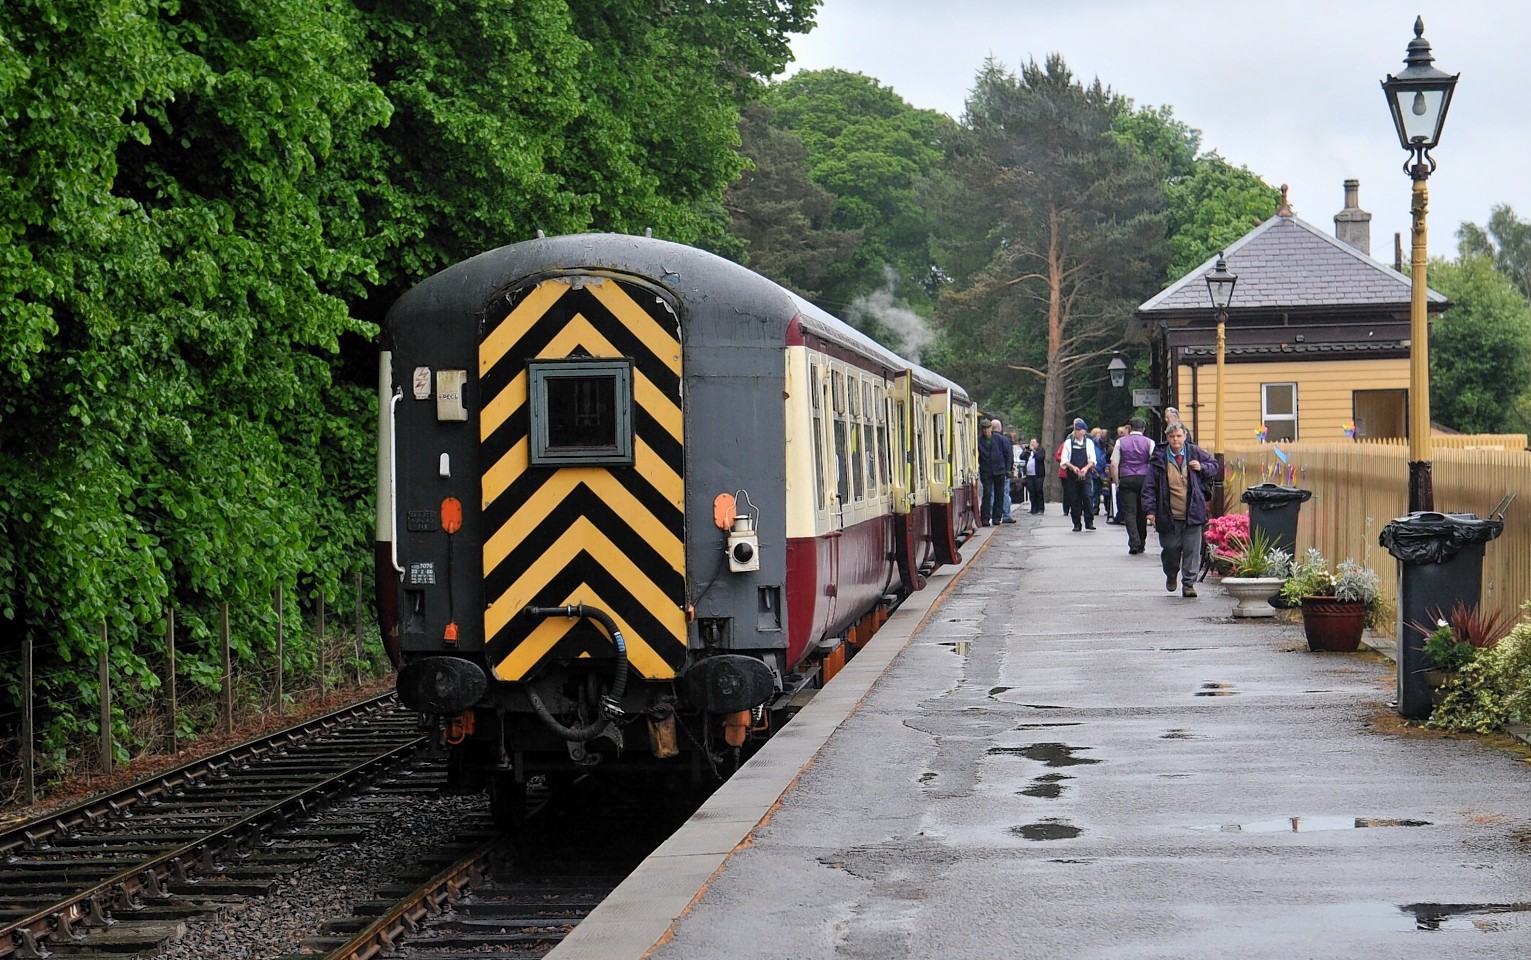 The Royal Deeside Railway is a popular tourist attraction